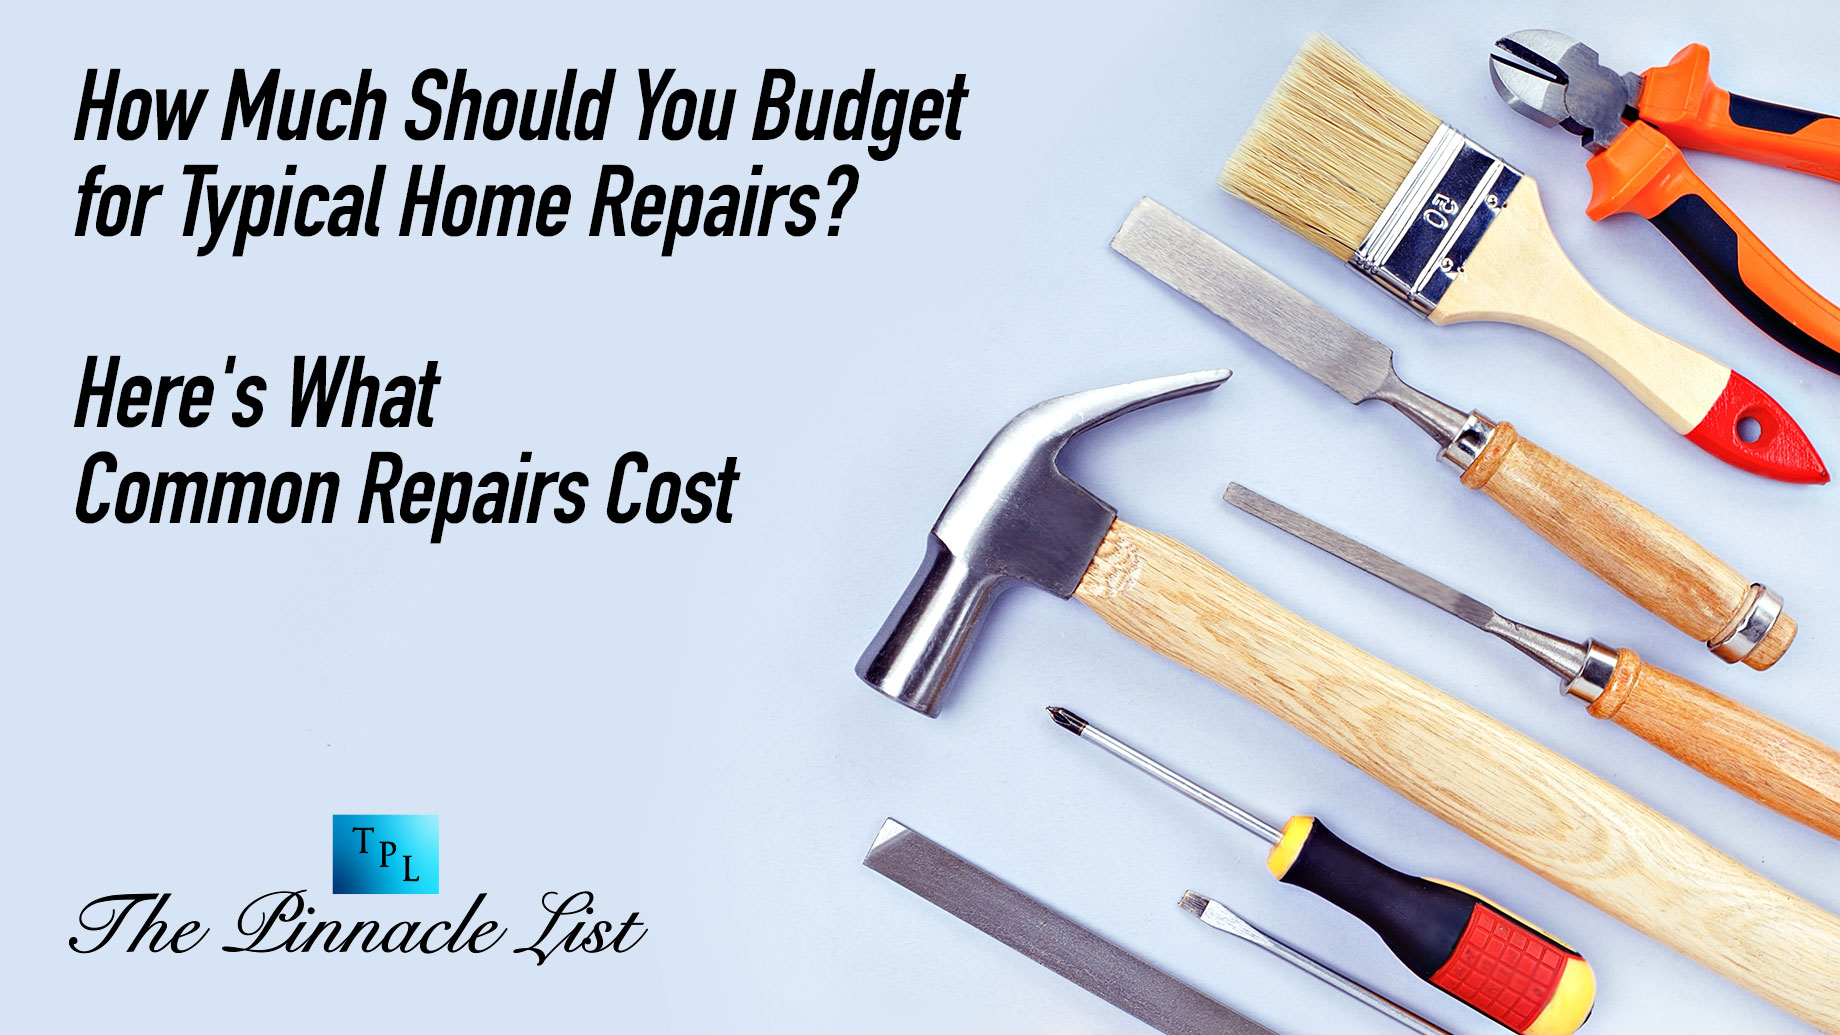 How Much Should You Budget for Typical Home Repairs? Here's What Common Repairs Cost